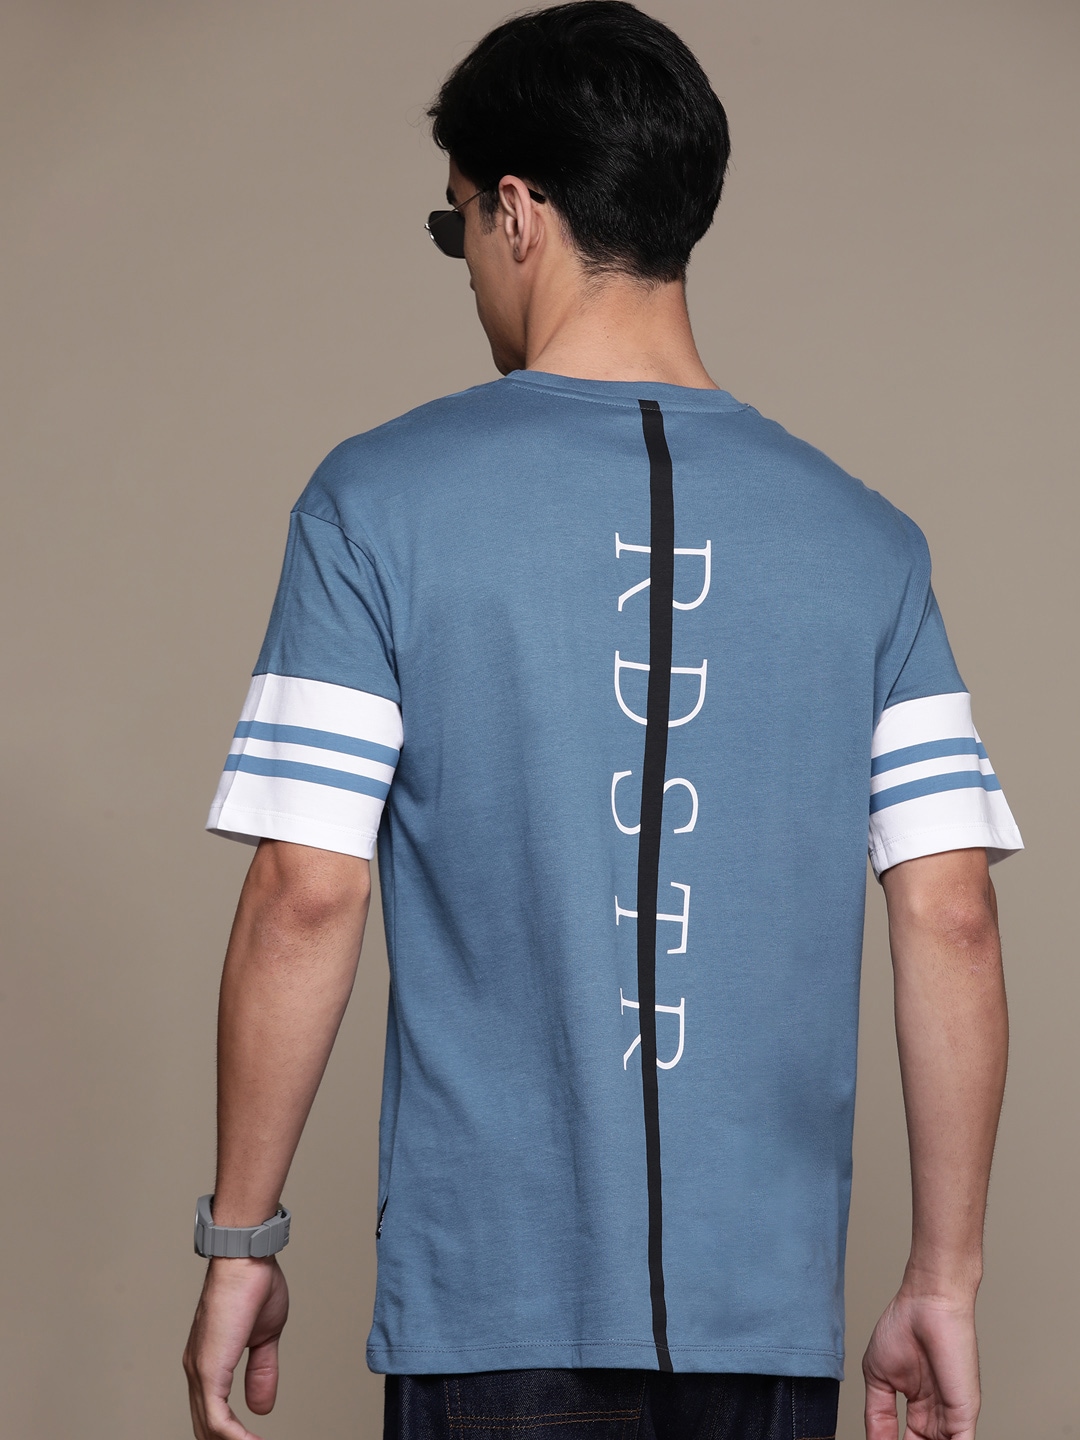 The Roadster Lifestyle Co. Brand Logo Printed Back Drop-Shoulder Sleeves Cotton T-shirt